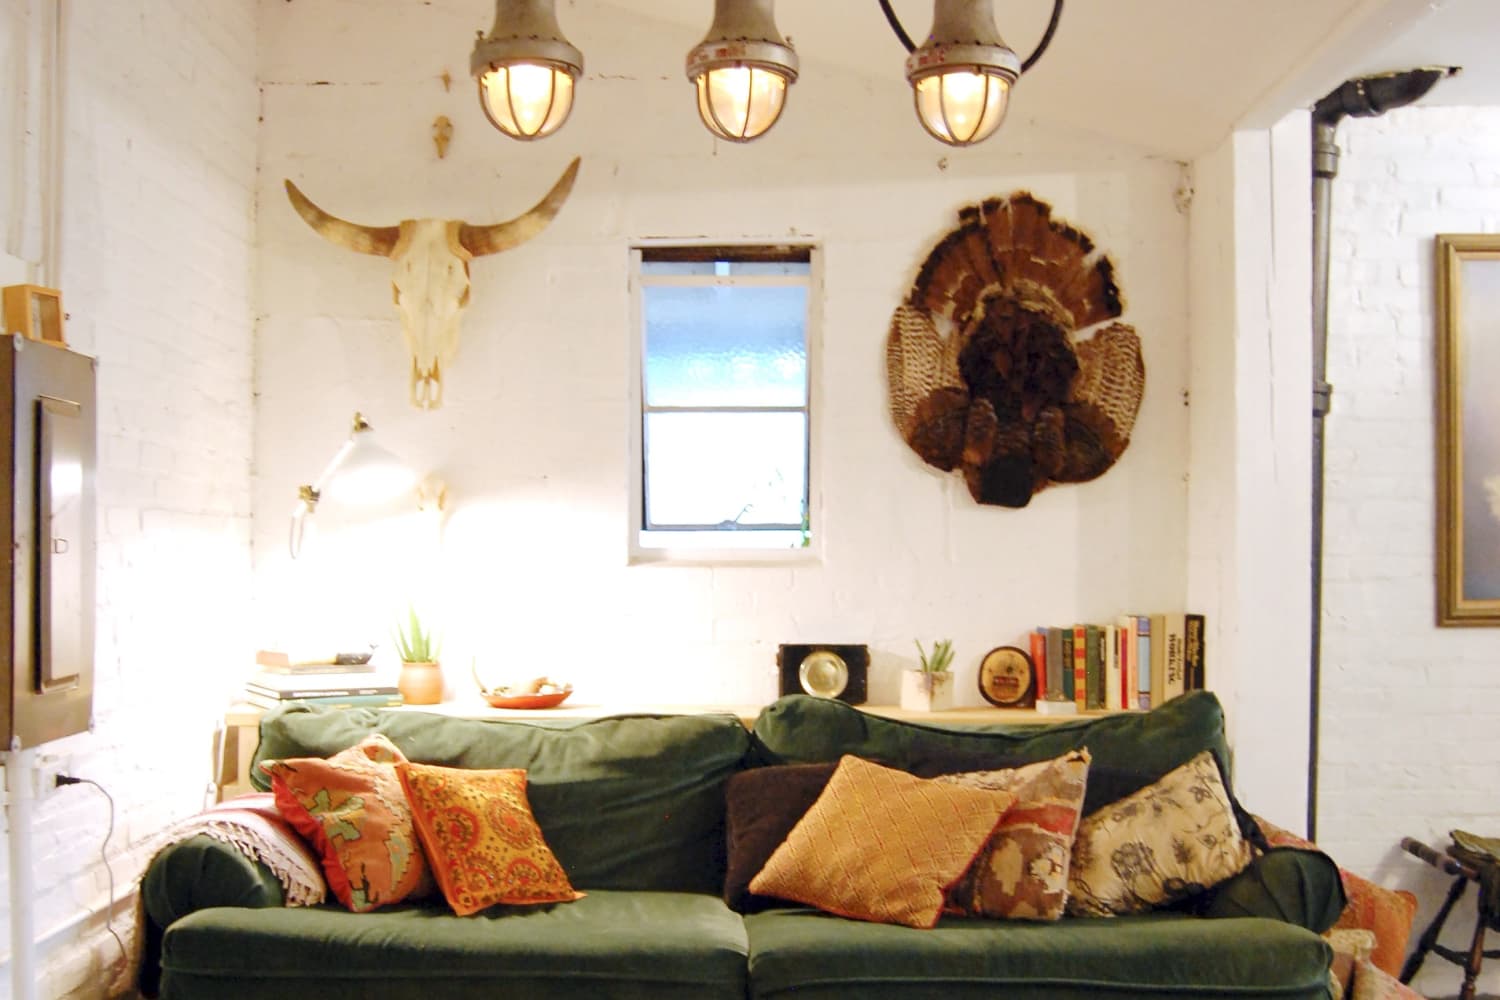 An Eclectic, Mid Century-Inspired Home Recording Studio » Jessica